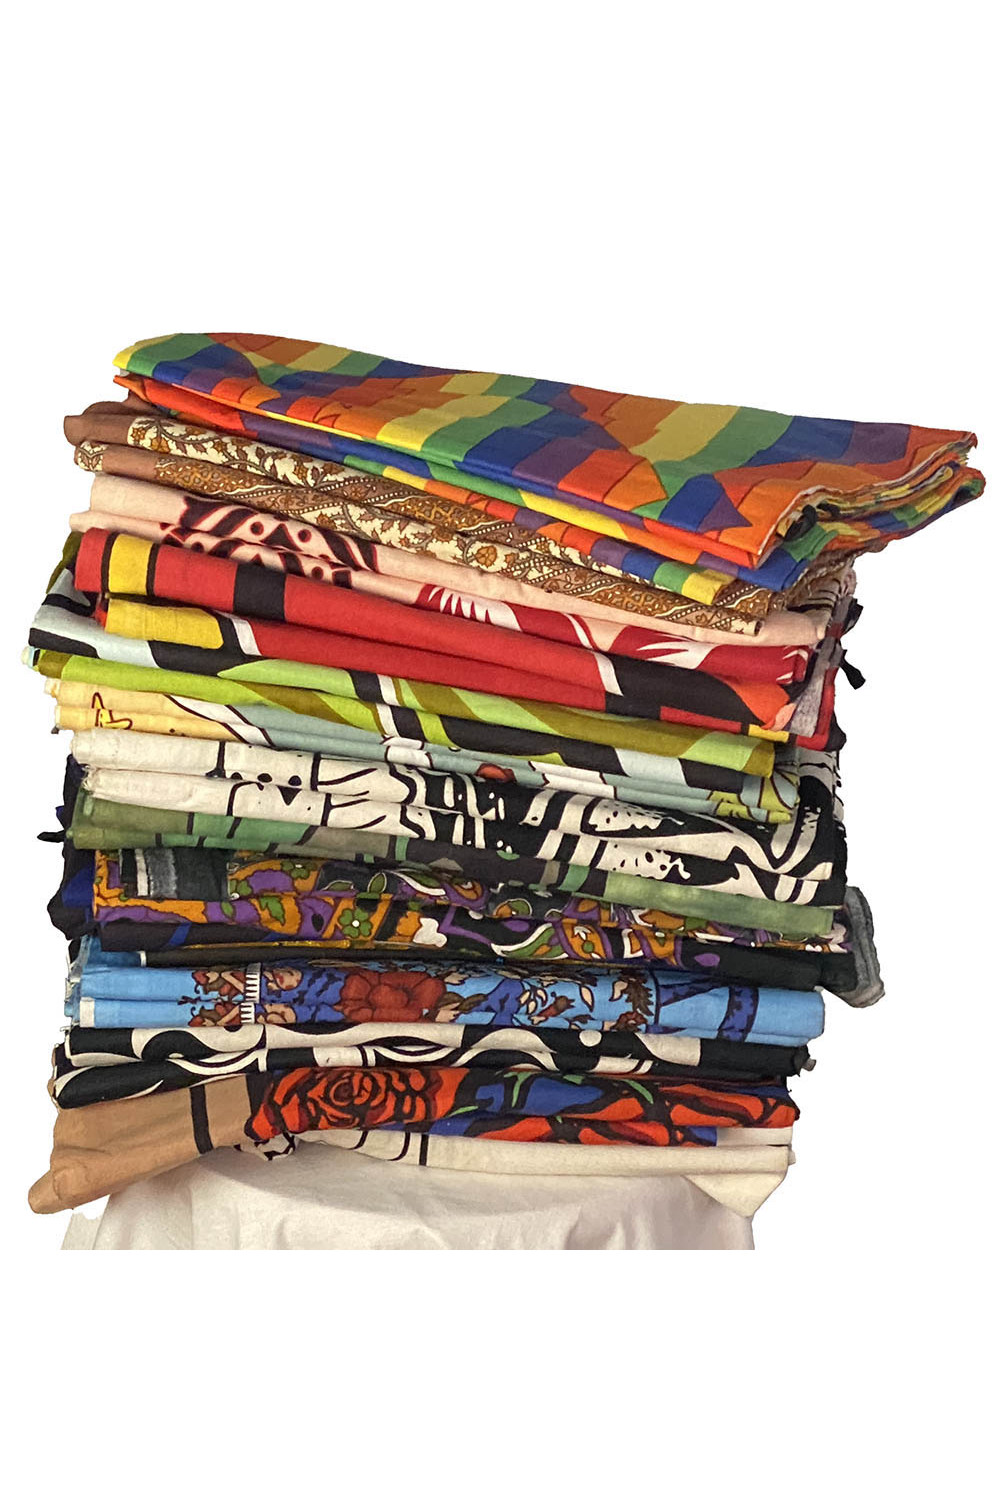 WHOLESALE LOT of 30 Assorted Crafter Quality Tapestries (Contains Print and Fabric Imperfections) -SAVE 50%